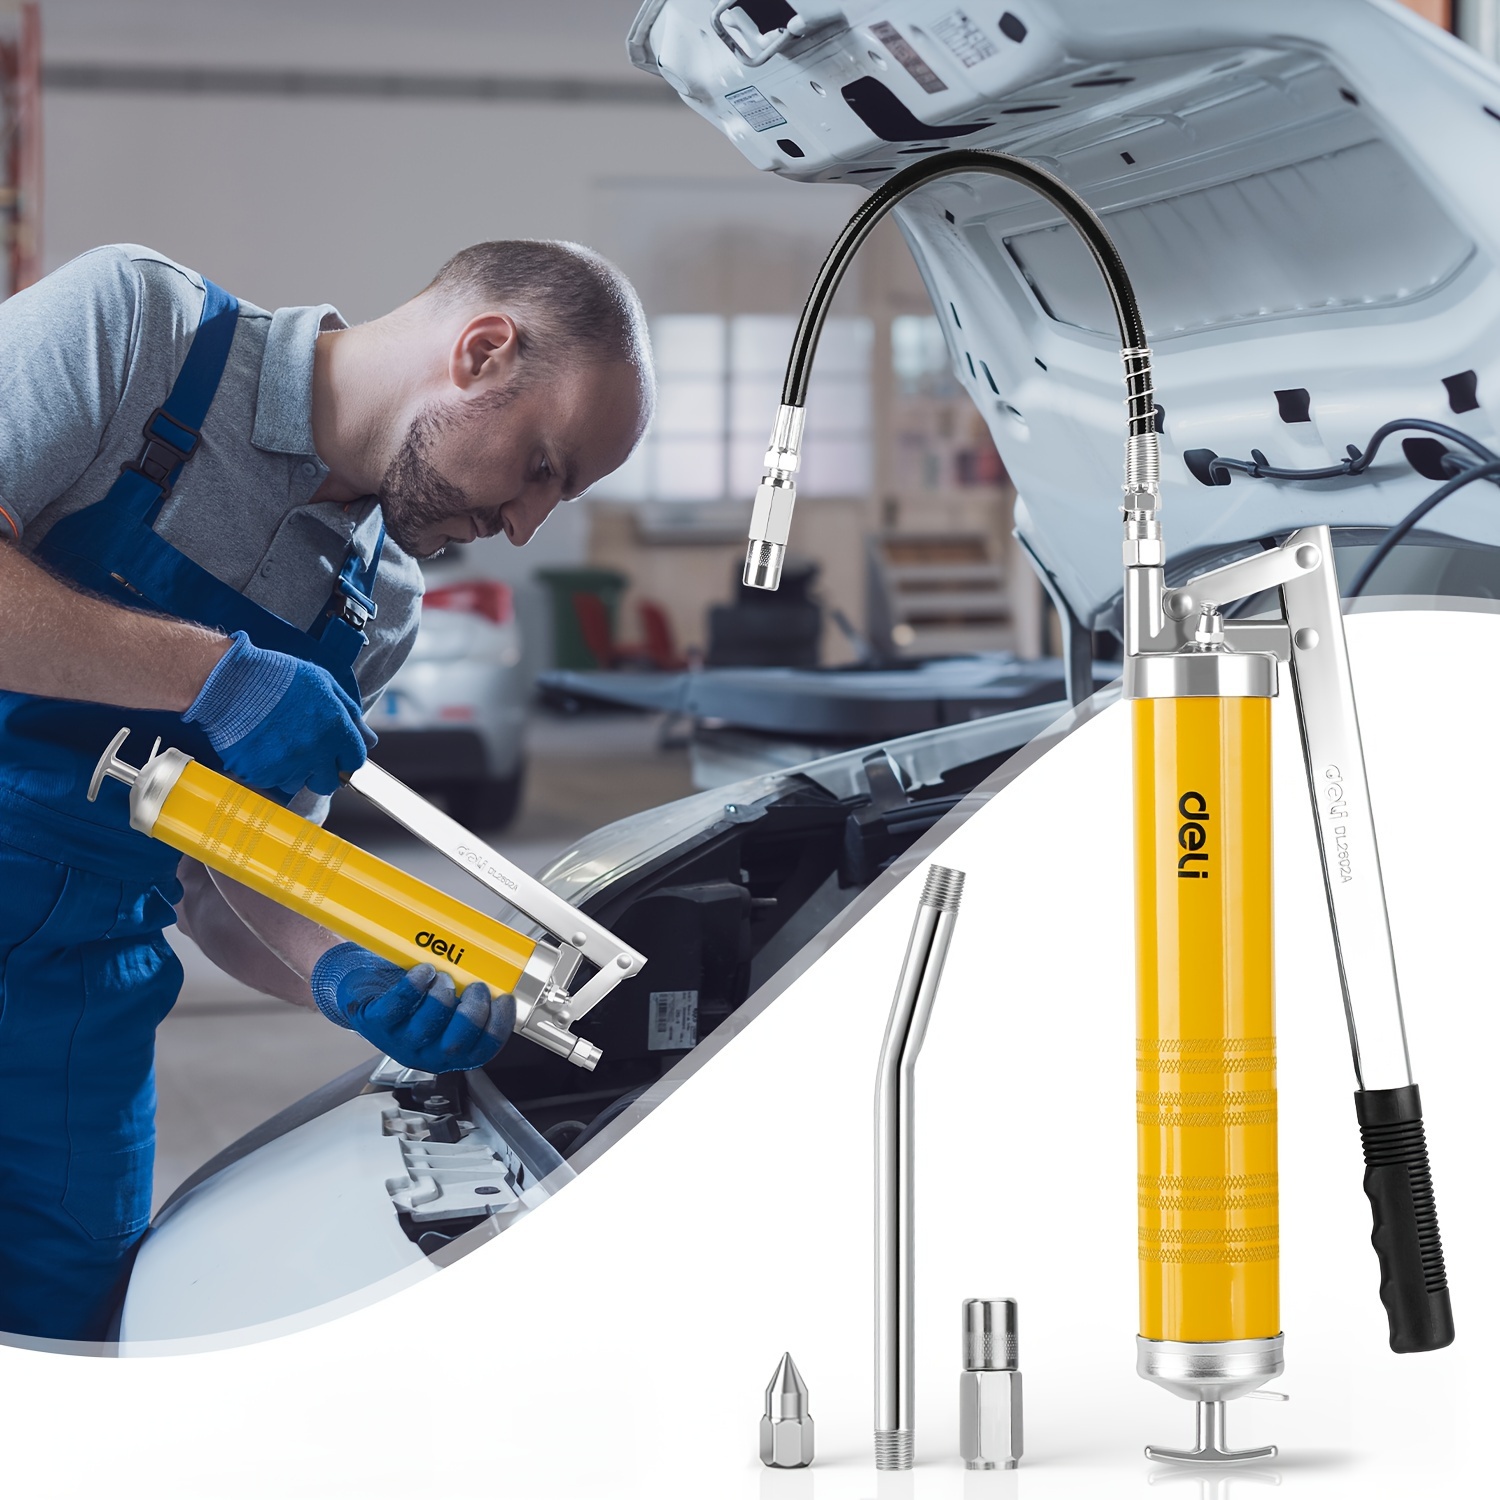 

Deli Grease Gun, 8000 Psi Heavy Duty Pistol Grip Grease Gun Kit With 14 Oz Load, 18 Inch Spring Flex Hose, 2 Basic Coupler, 1 Fixed Tube And 2 Sharp Type Nozzle, Yellow